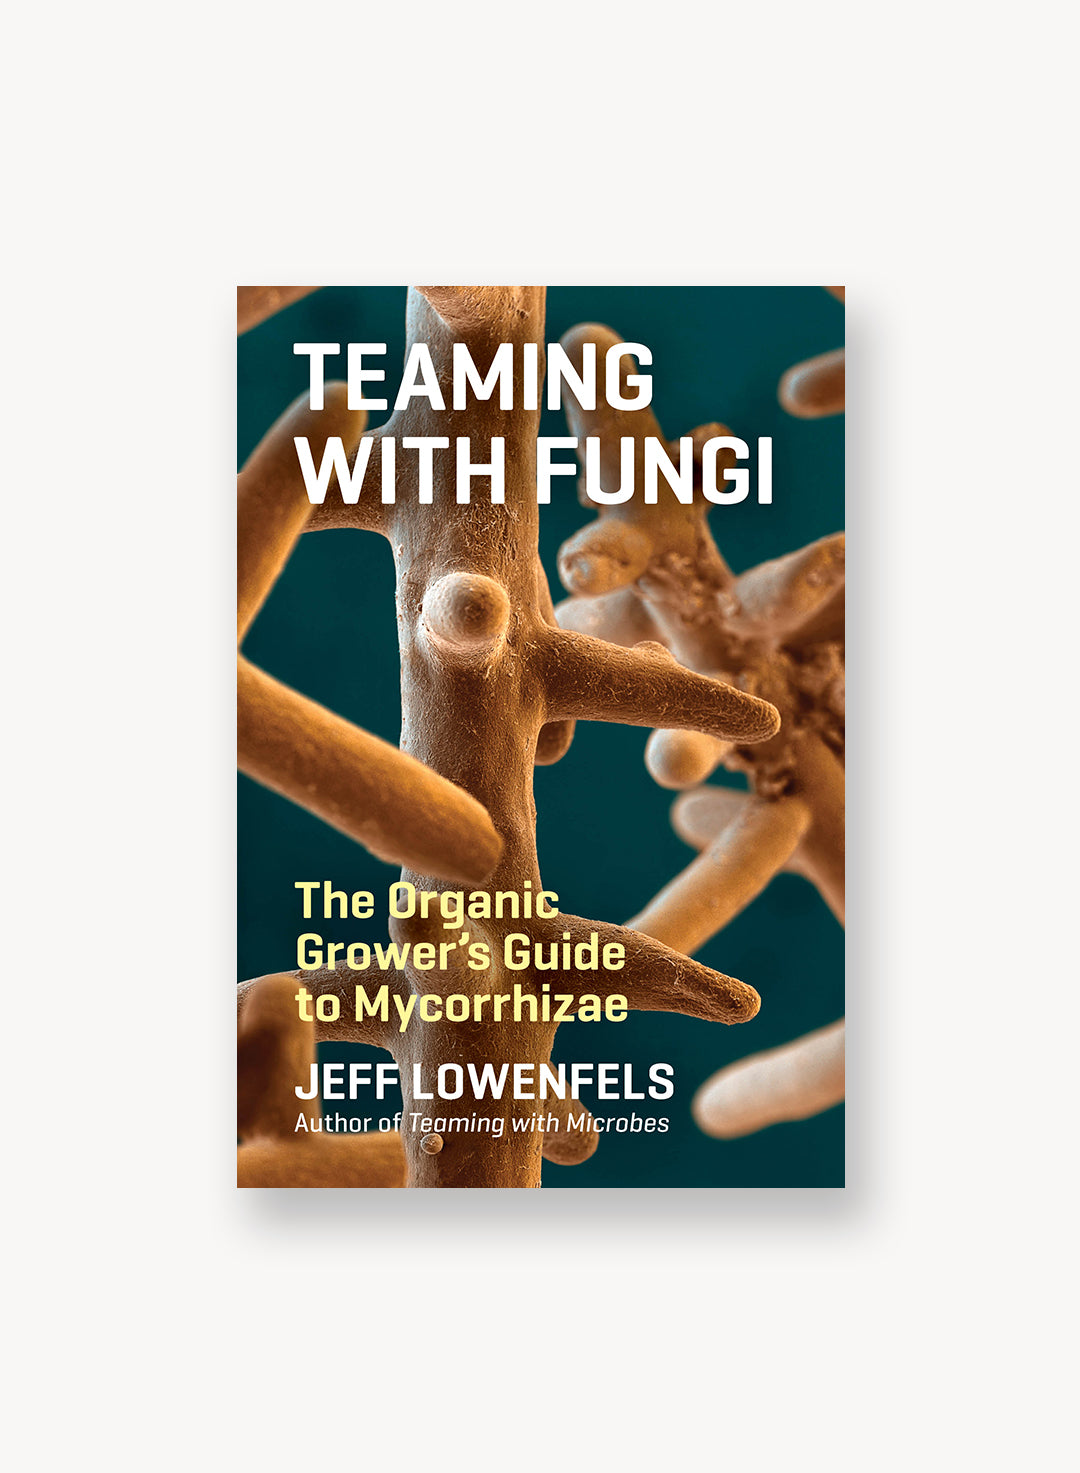 Teaming With Fungi: The Organic Grower's Guide to Mycorrhizae